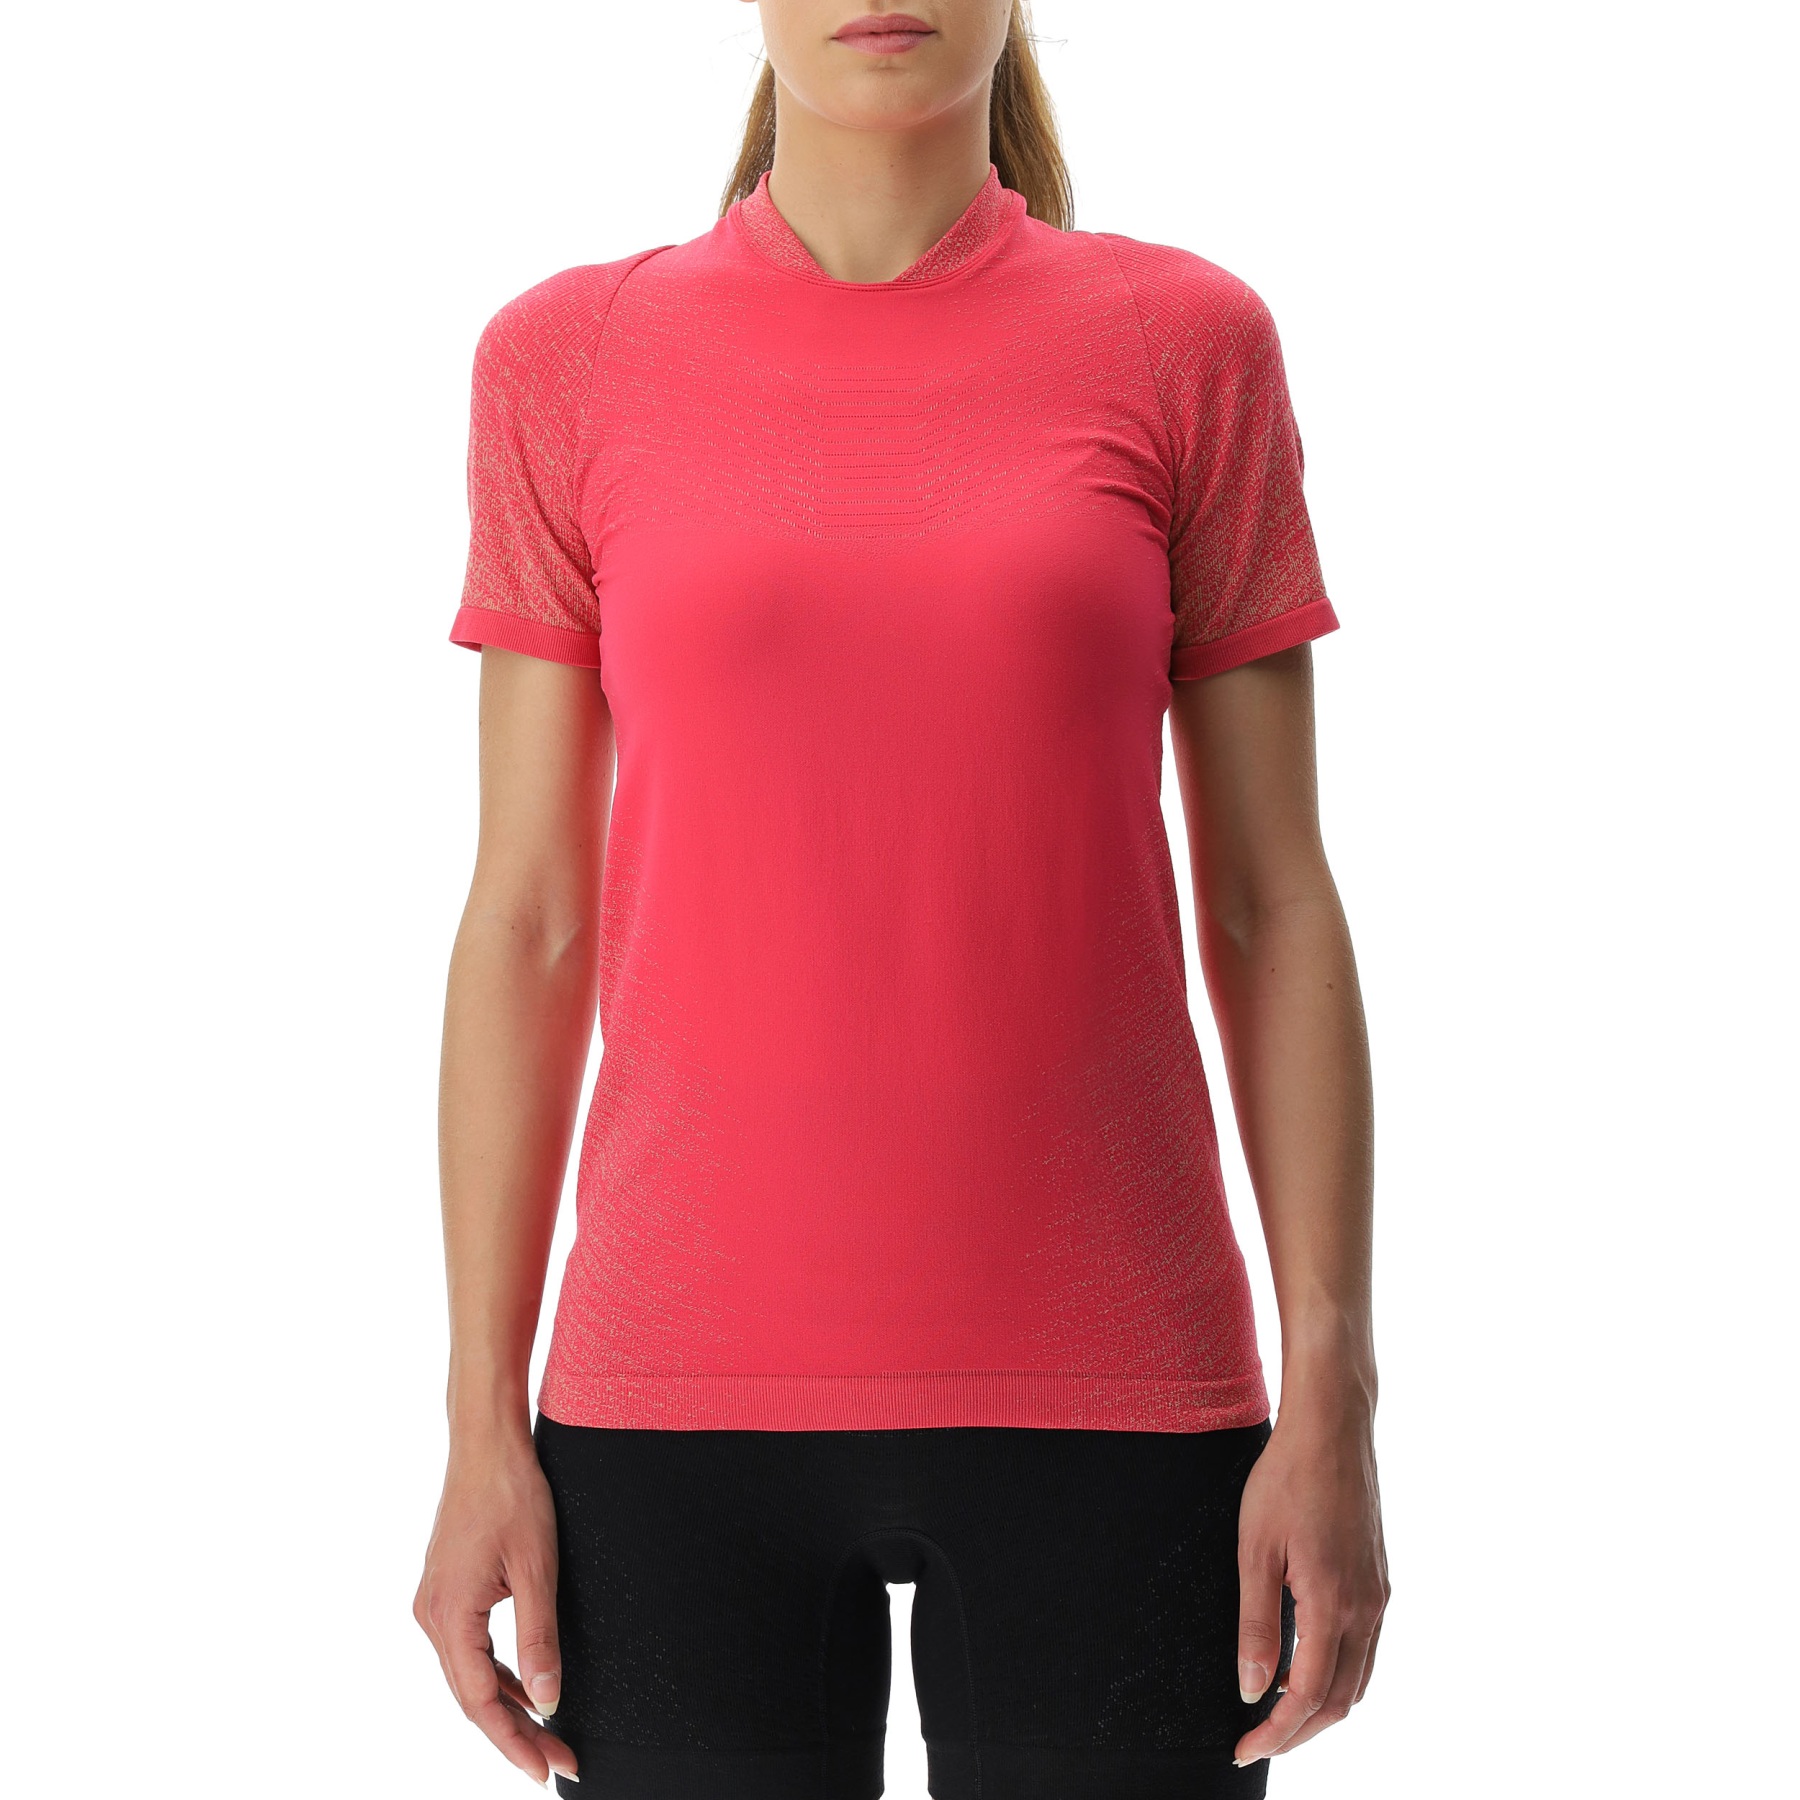 Picture of UYN Running Exceleration Short Sleeve Shirt Women - Rose/Sunny